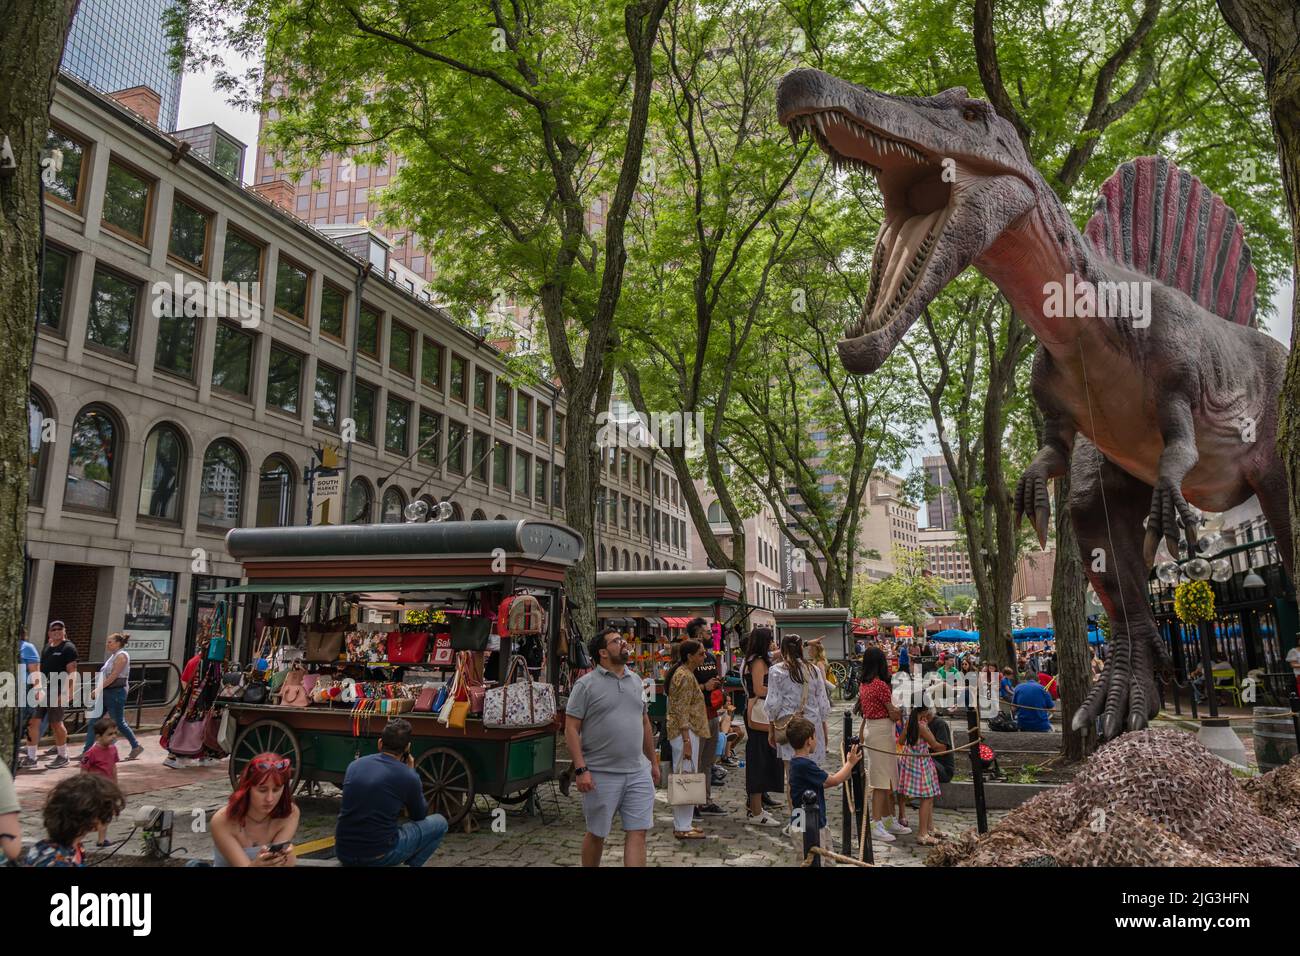 Boston, MA, US-June 11, 2022: People at busy downtown food market and tourist destination with large dinosaur statue in background. Stock Photo